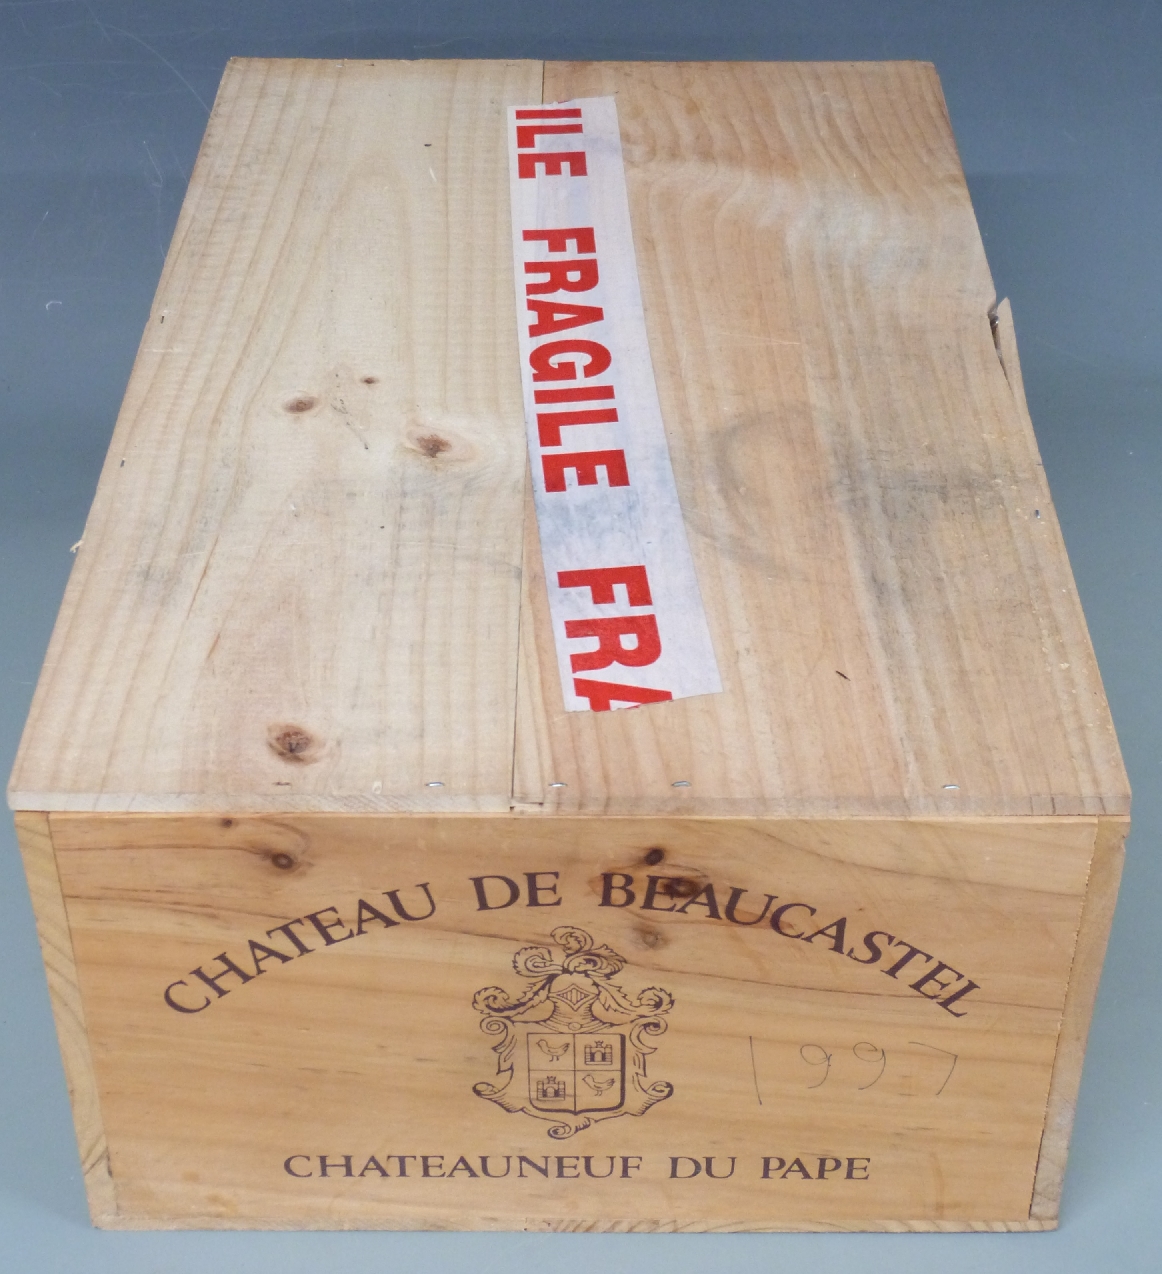 Case of twelve Chateauneuf de Pape Chateau de Beaucastel 1997 red wine, 750ml, 13.5% vol., sealed in - Image 2 of 2